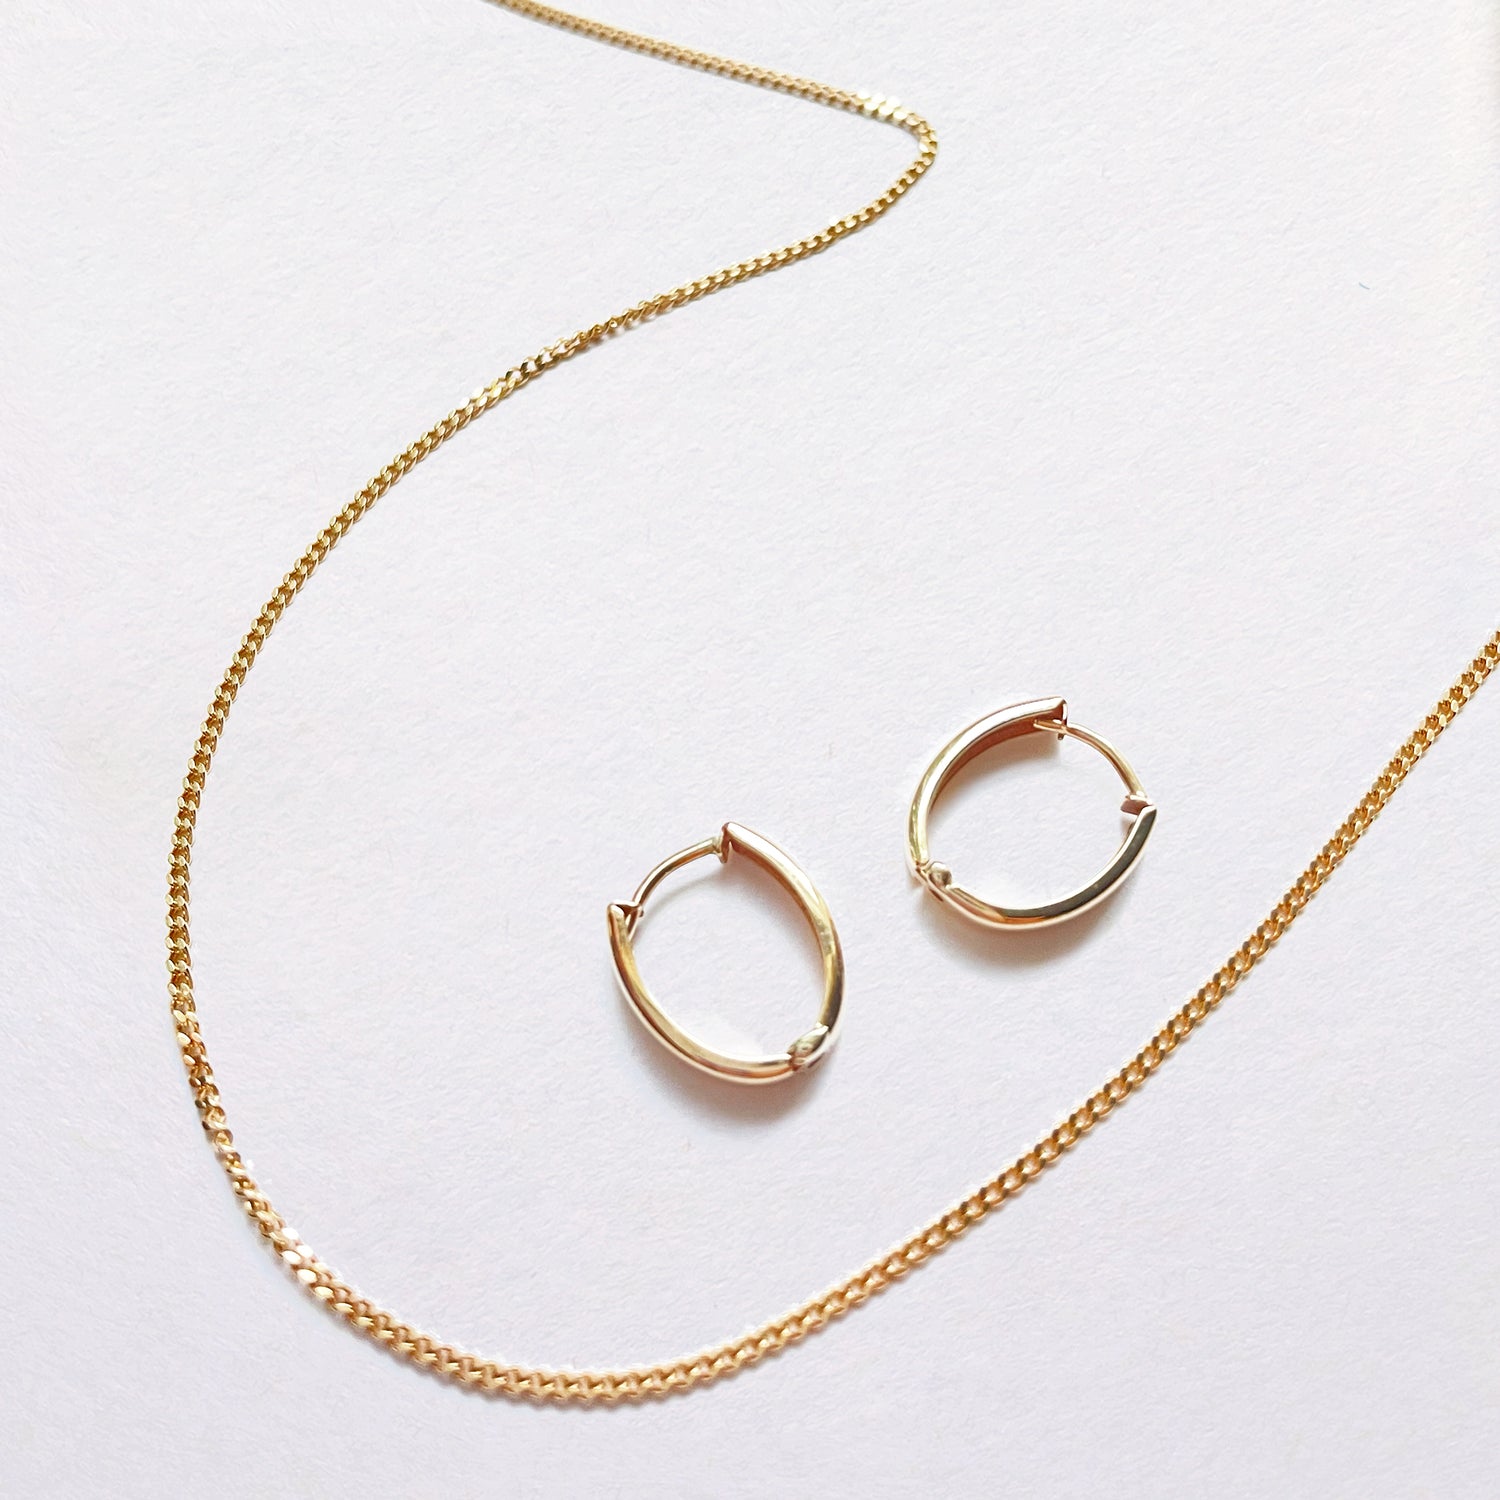 solid gold huggie hoop earrings and embrace curb chain necklace - AïANA jewellery Australia